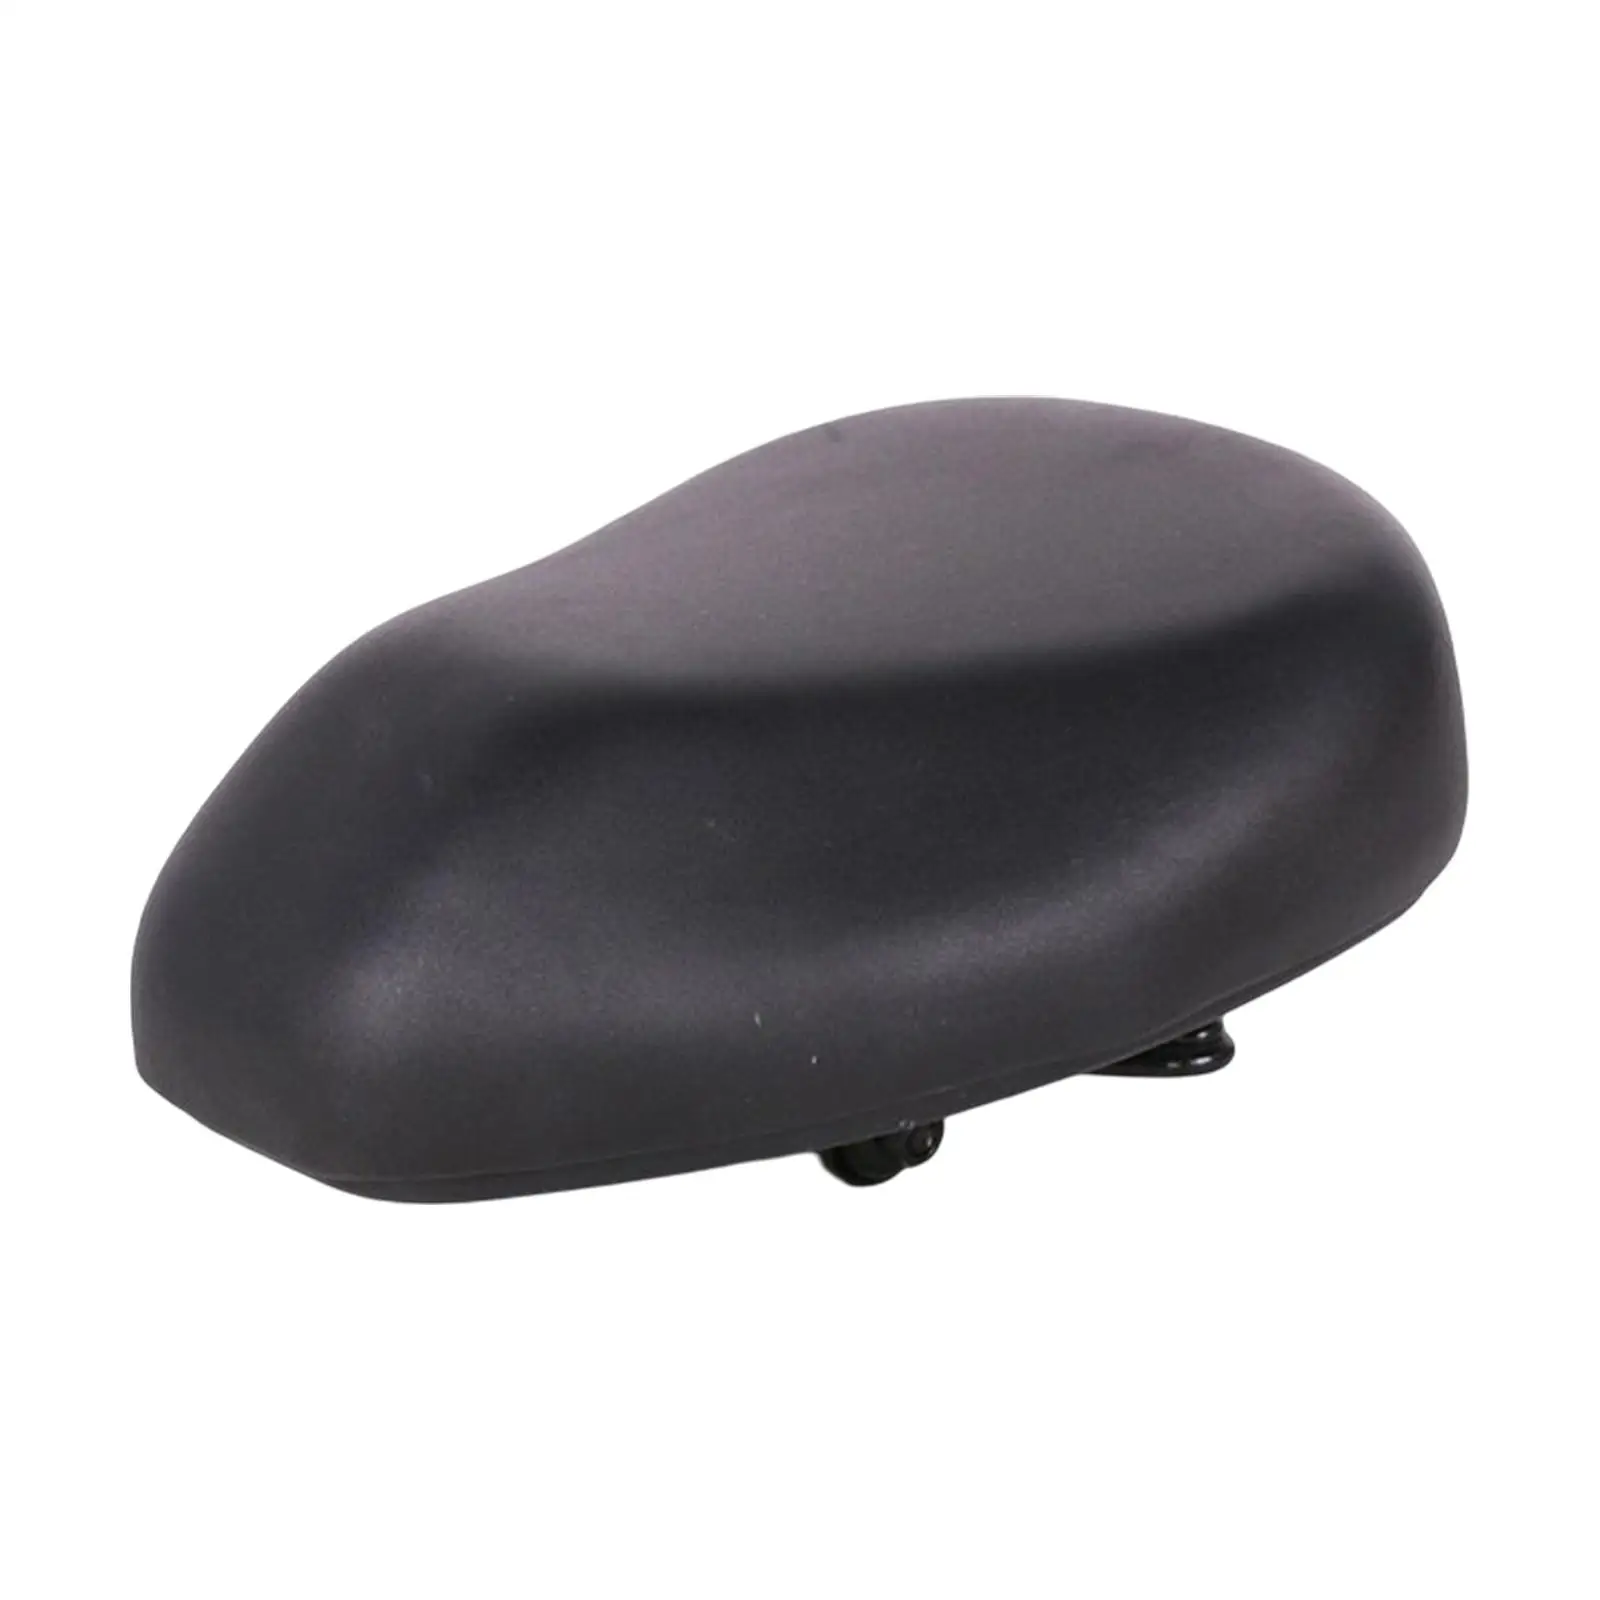 Bike Seat Cushion Cover Saddle Shock Absorbing Comfortable Padded Easy Mount Firm Fits for Electric Scooter MTB Bike Road Bike